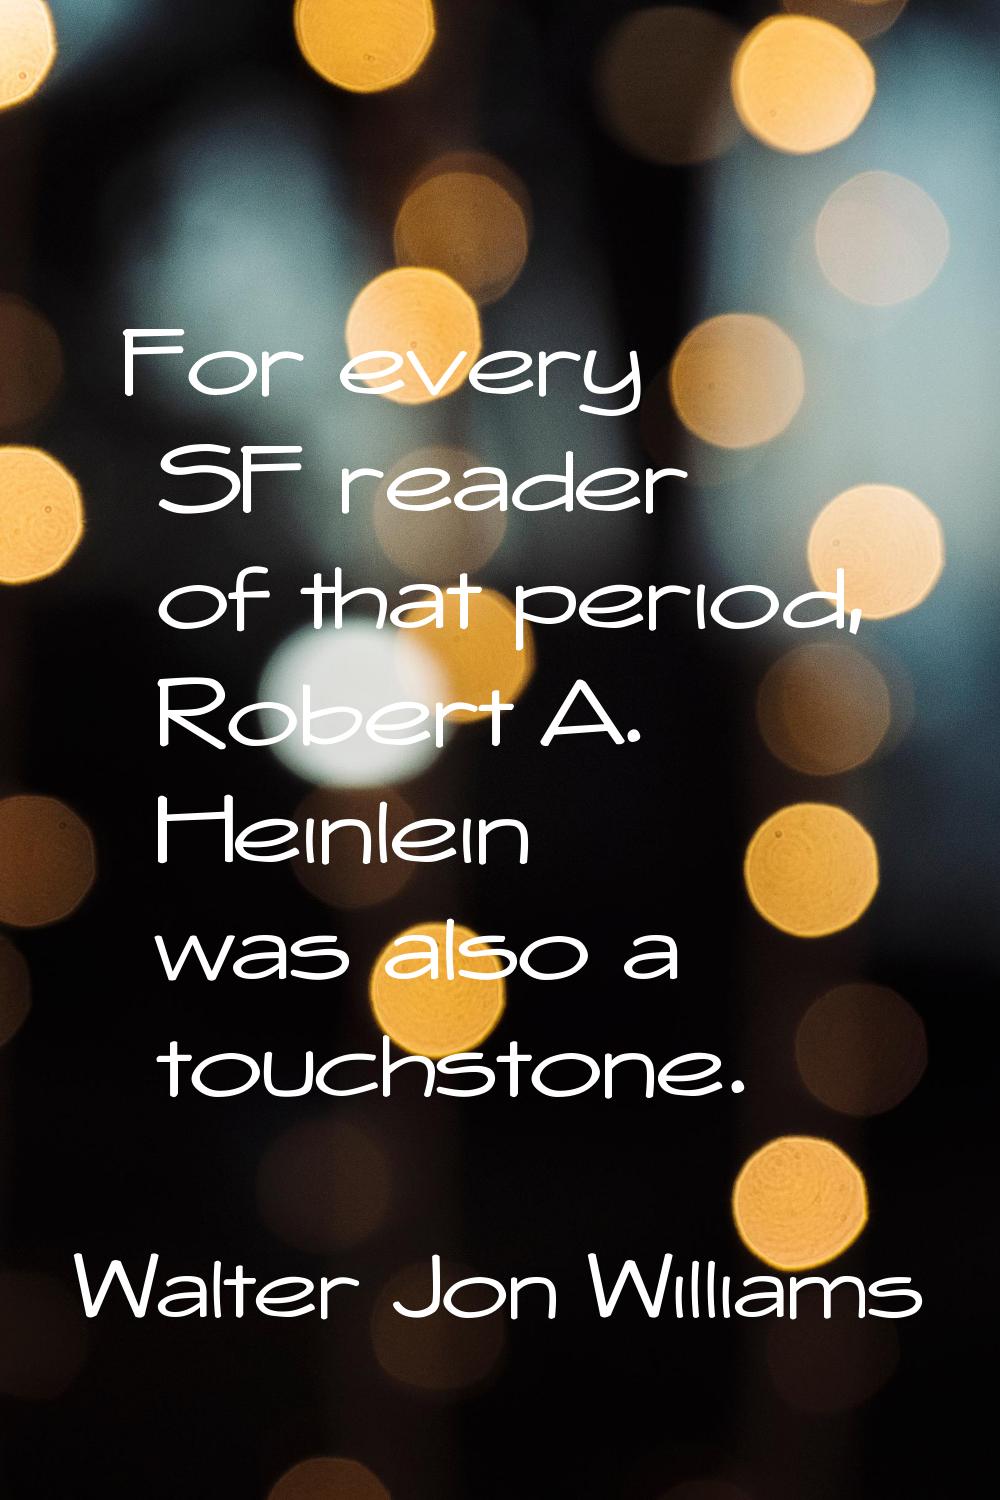 For every SF reader of that period, Robert A. Heinlein was also a touchstone.